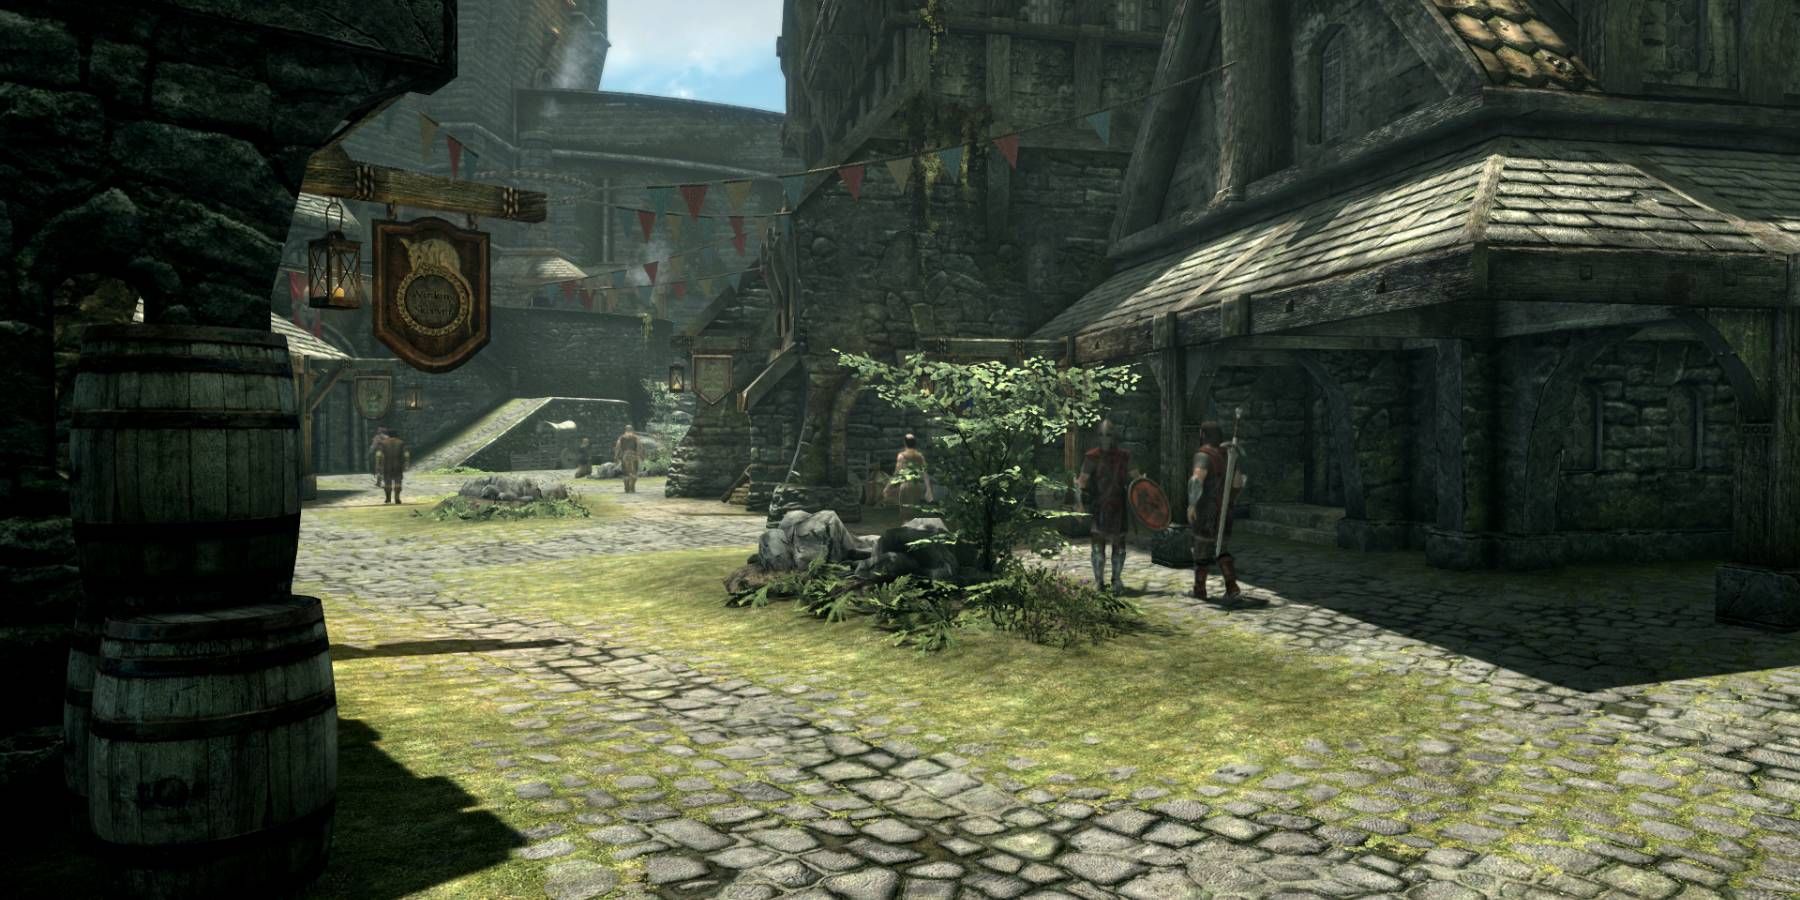 The streets of Solitude in Skyrim